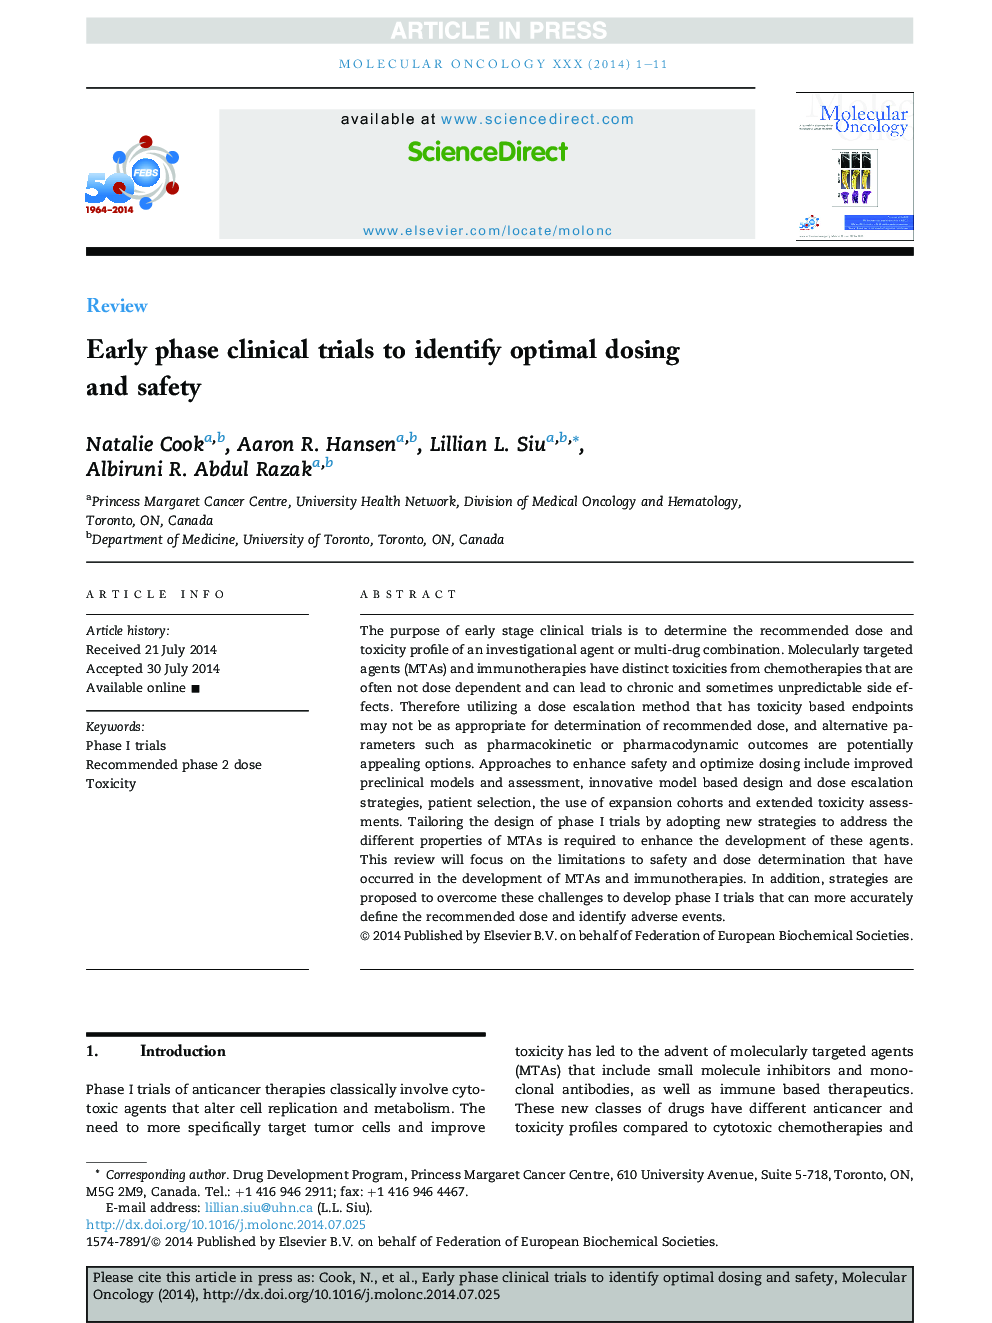 Early phase clinical trials to identify optimal dosing and safety